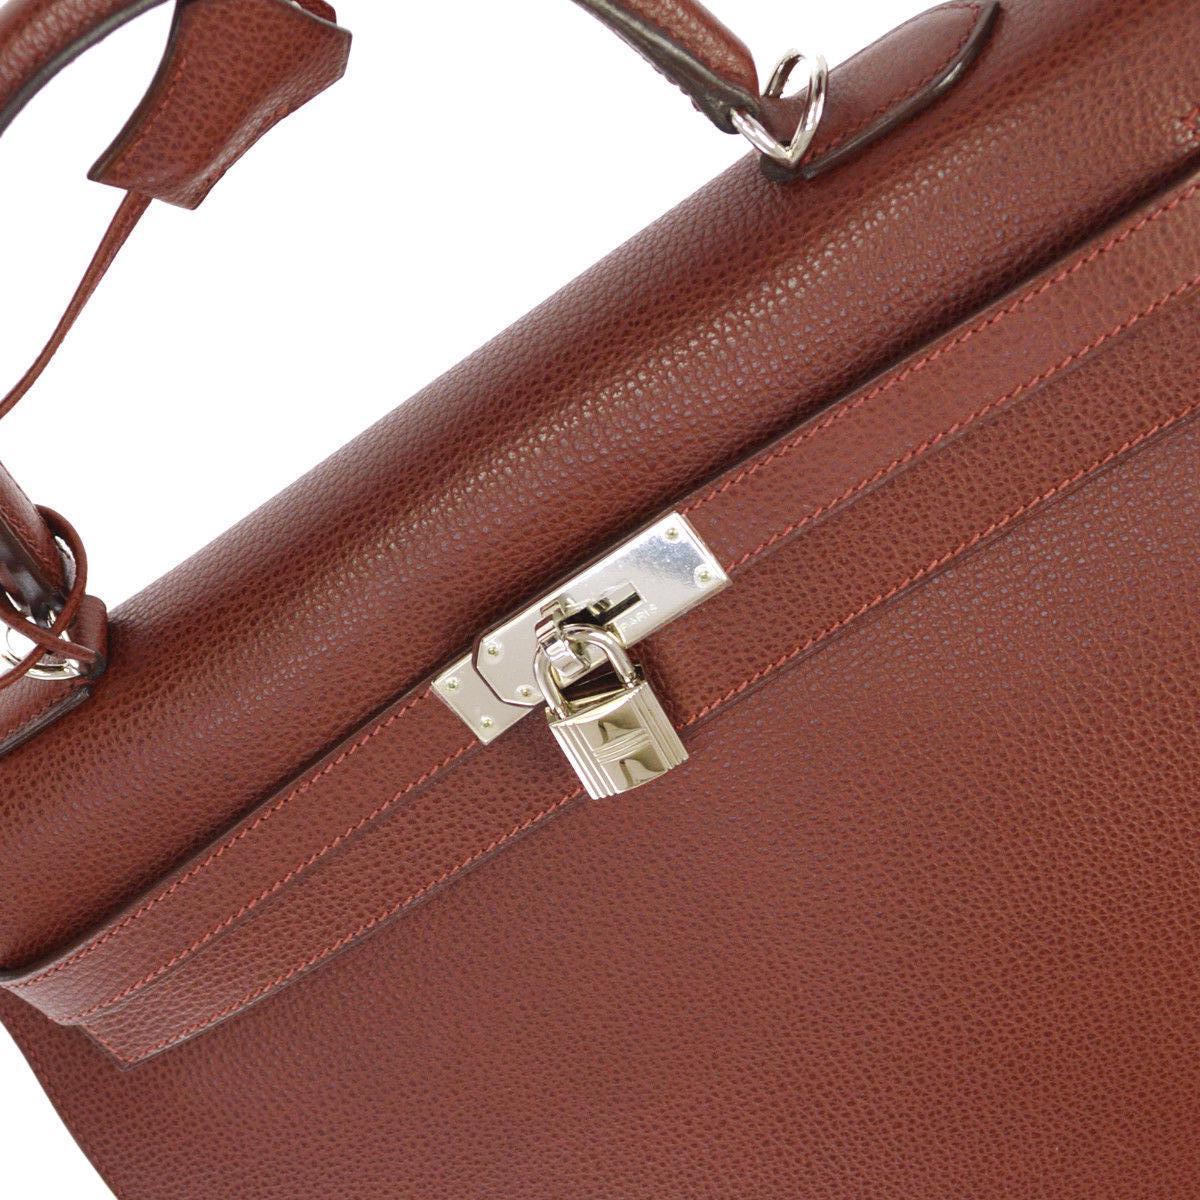 Hermes Kelly 35 Red Leather Palladium Silver Top Handle Satchel Shoulder Bag in Box

Leather
Palladium silver tone hardware
Leather lining
Date code present
Made in France
Handle drop 3.5